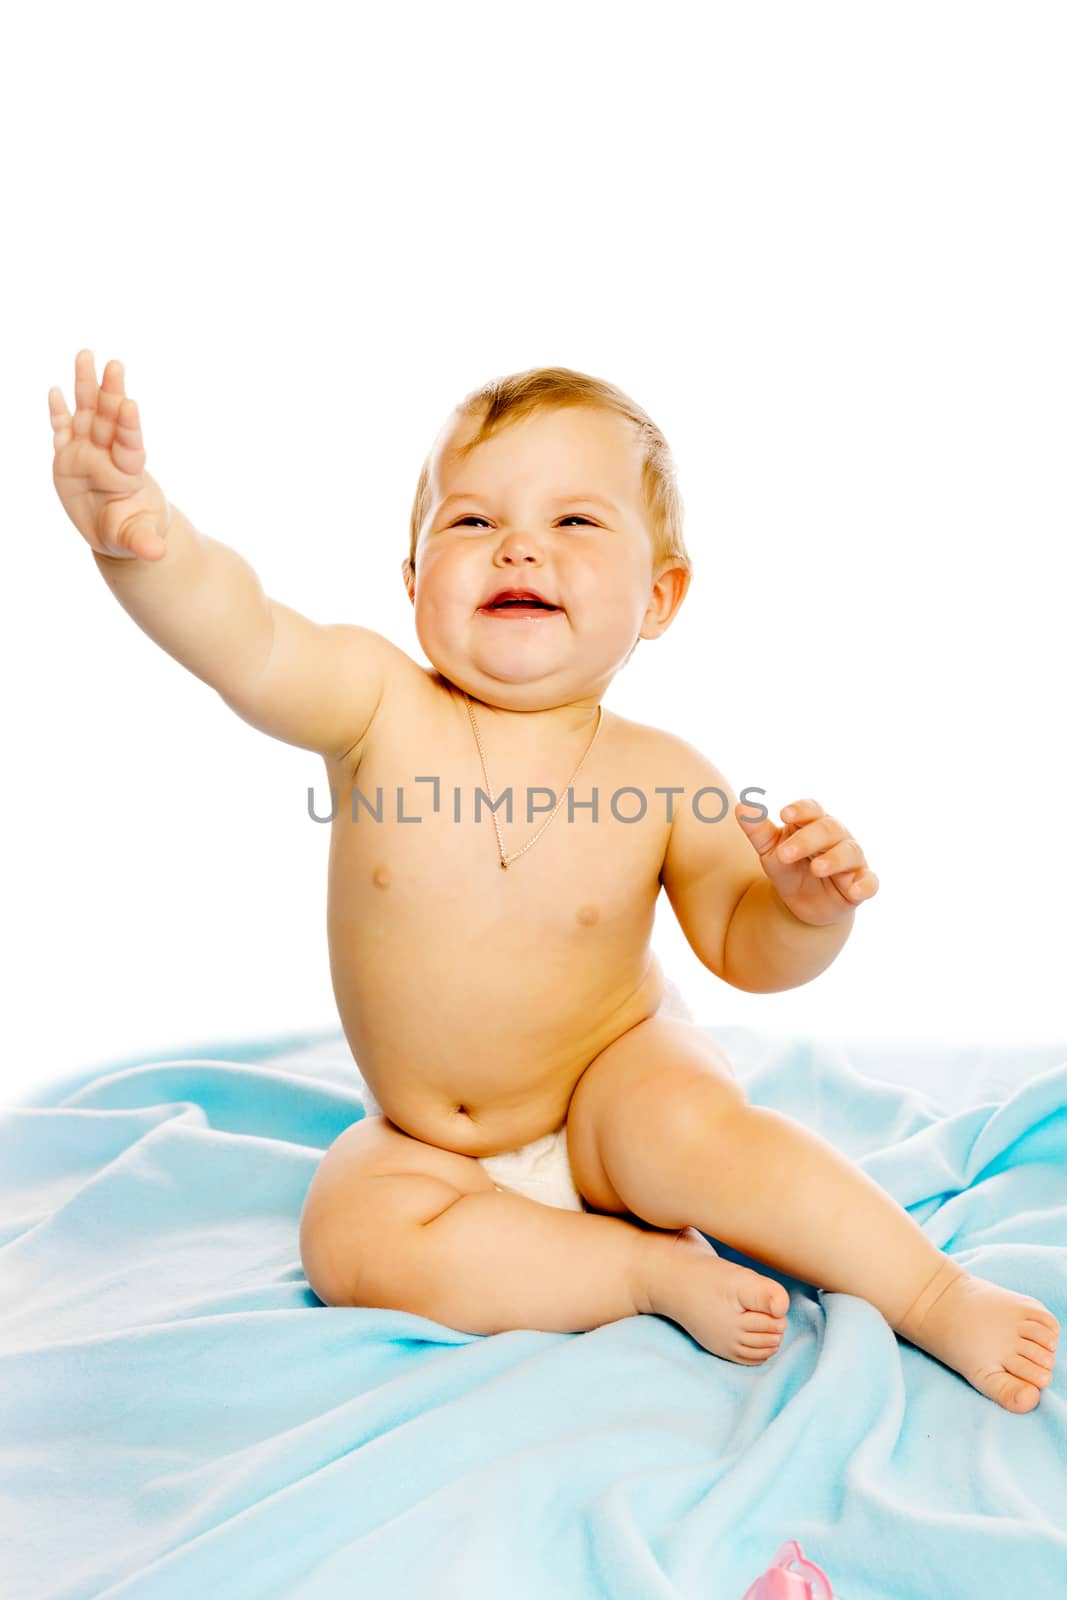 baby in diaper sitting on a blue blanket. Isolated by pzRomashka